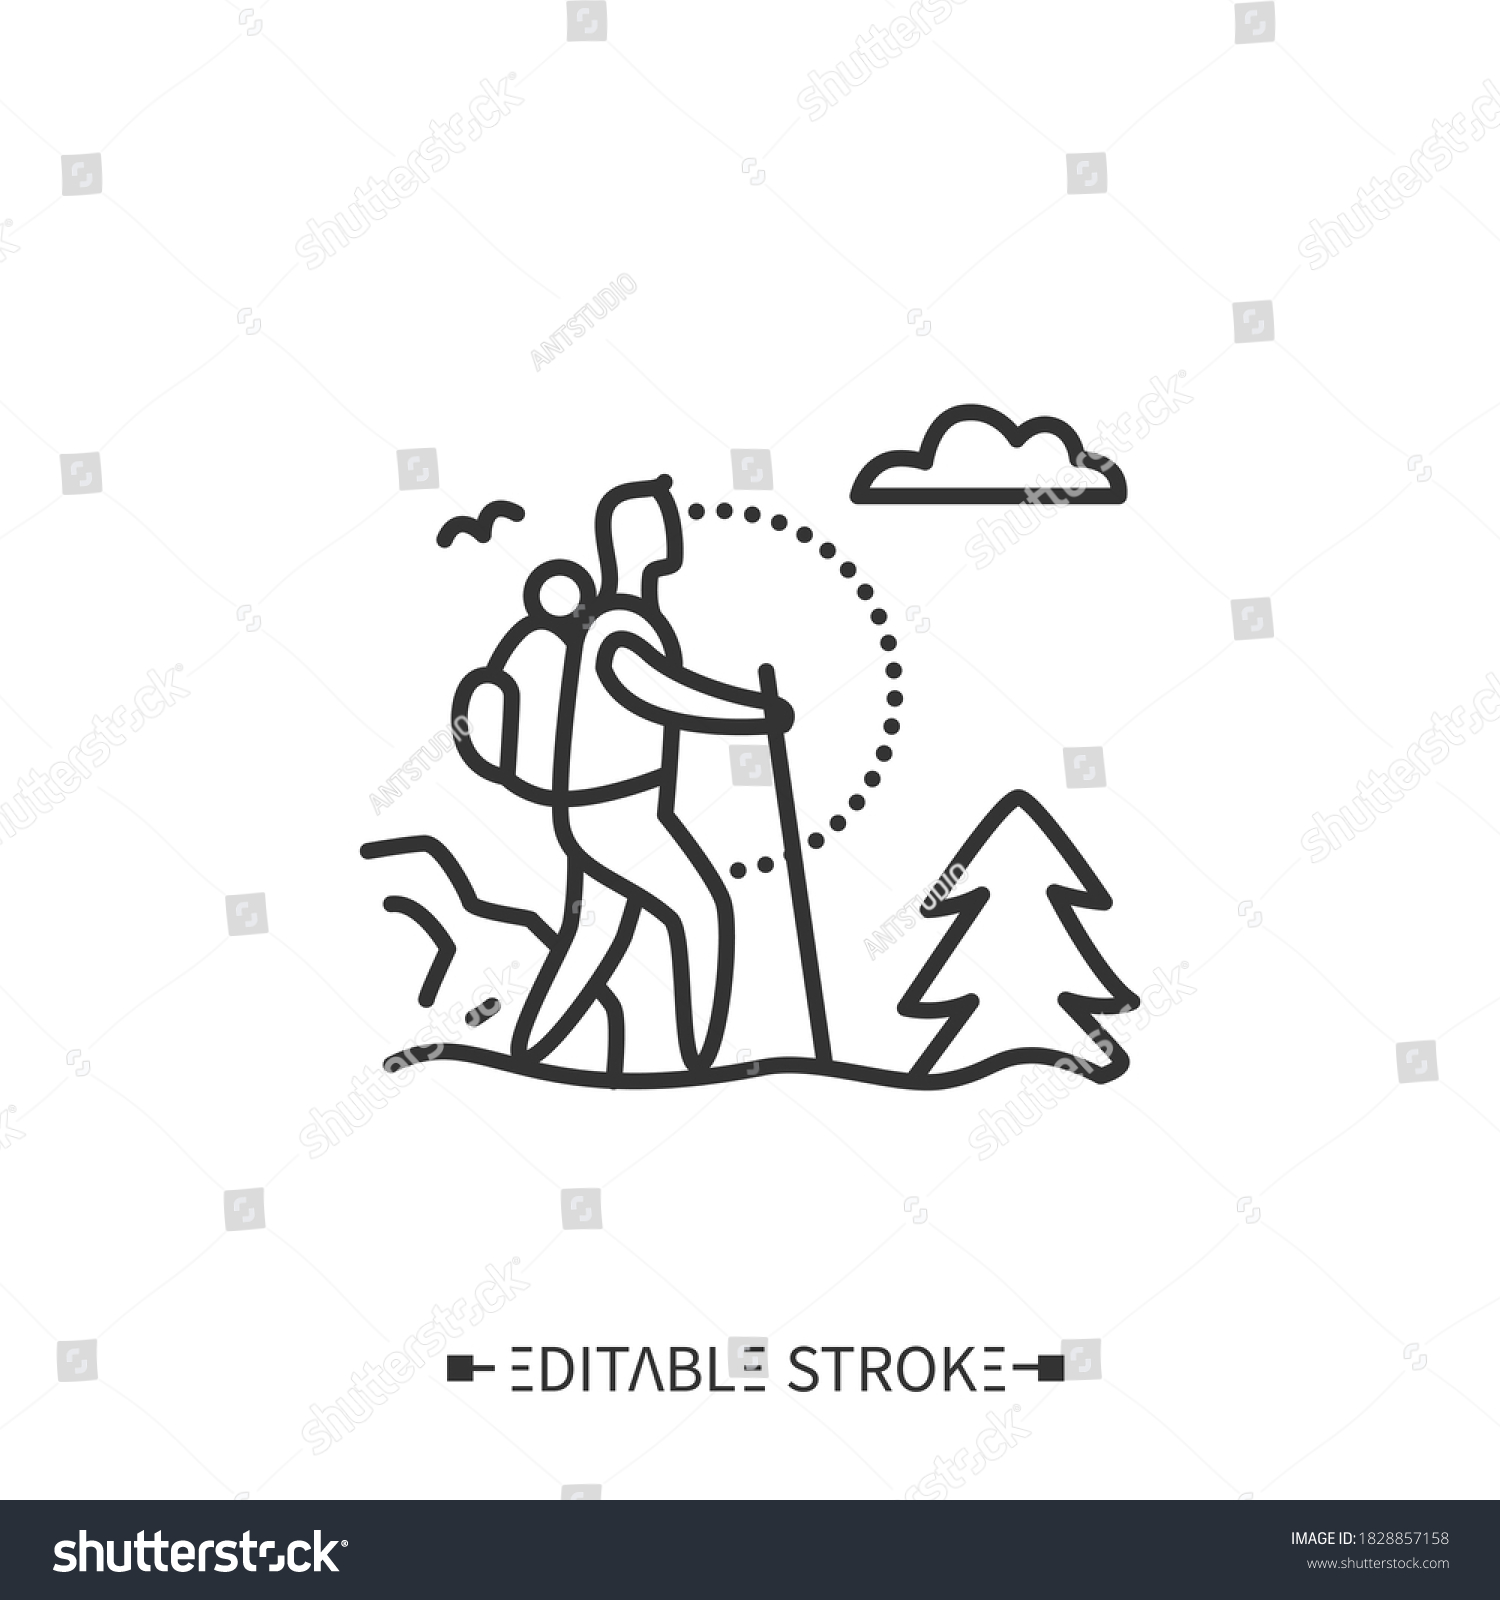 Trekking line icon. Adventure tourism. Mountain tourism. Backpacking. Long distance walking trip with camping stops. Mount climbing.Tourism types concept. Isolated vector illustration.Editable stroke  #1828857158